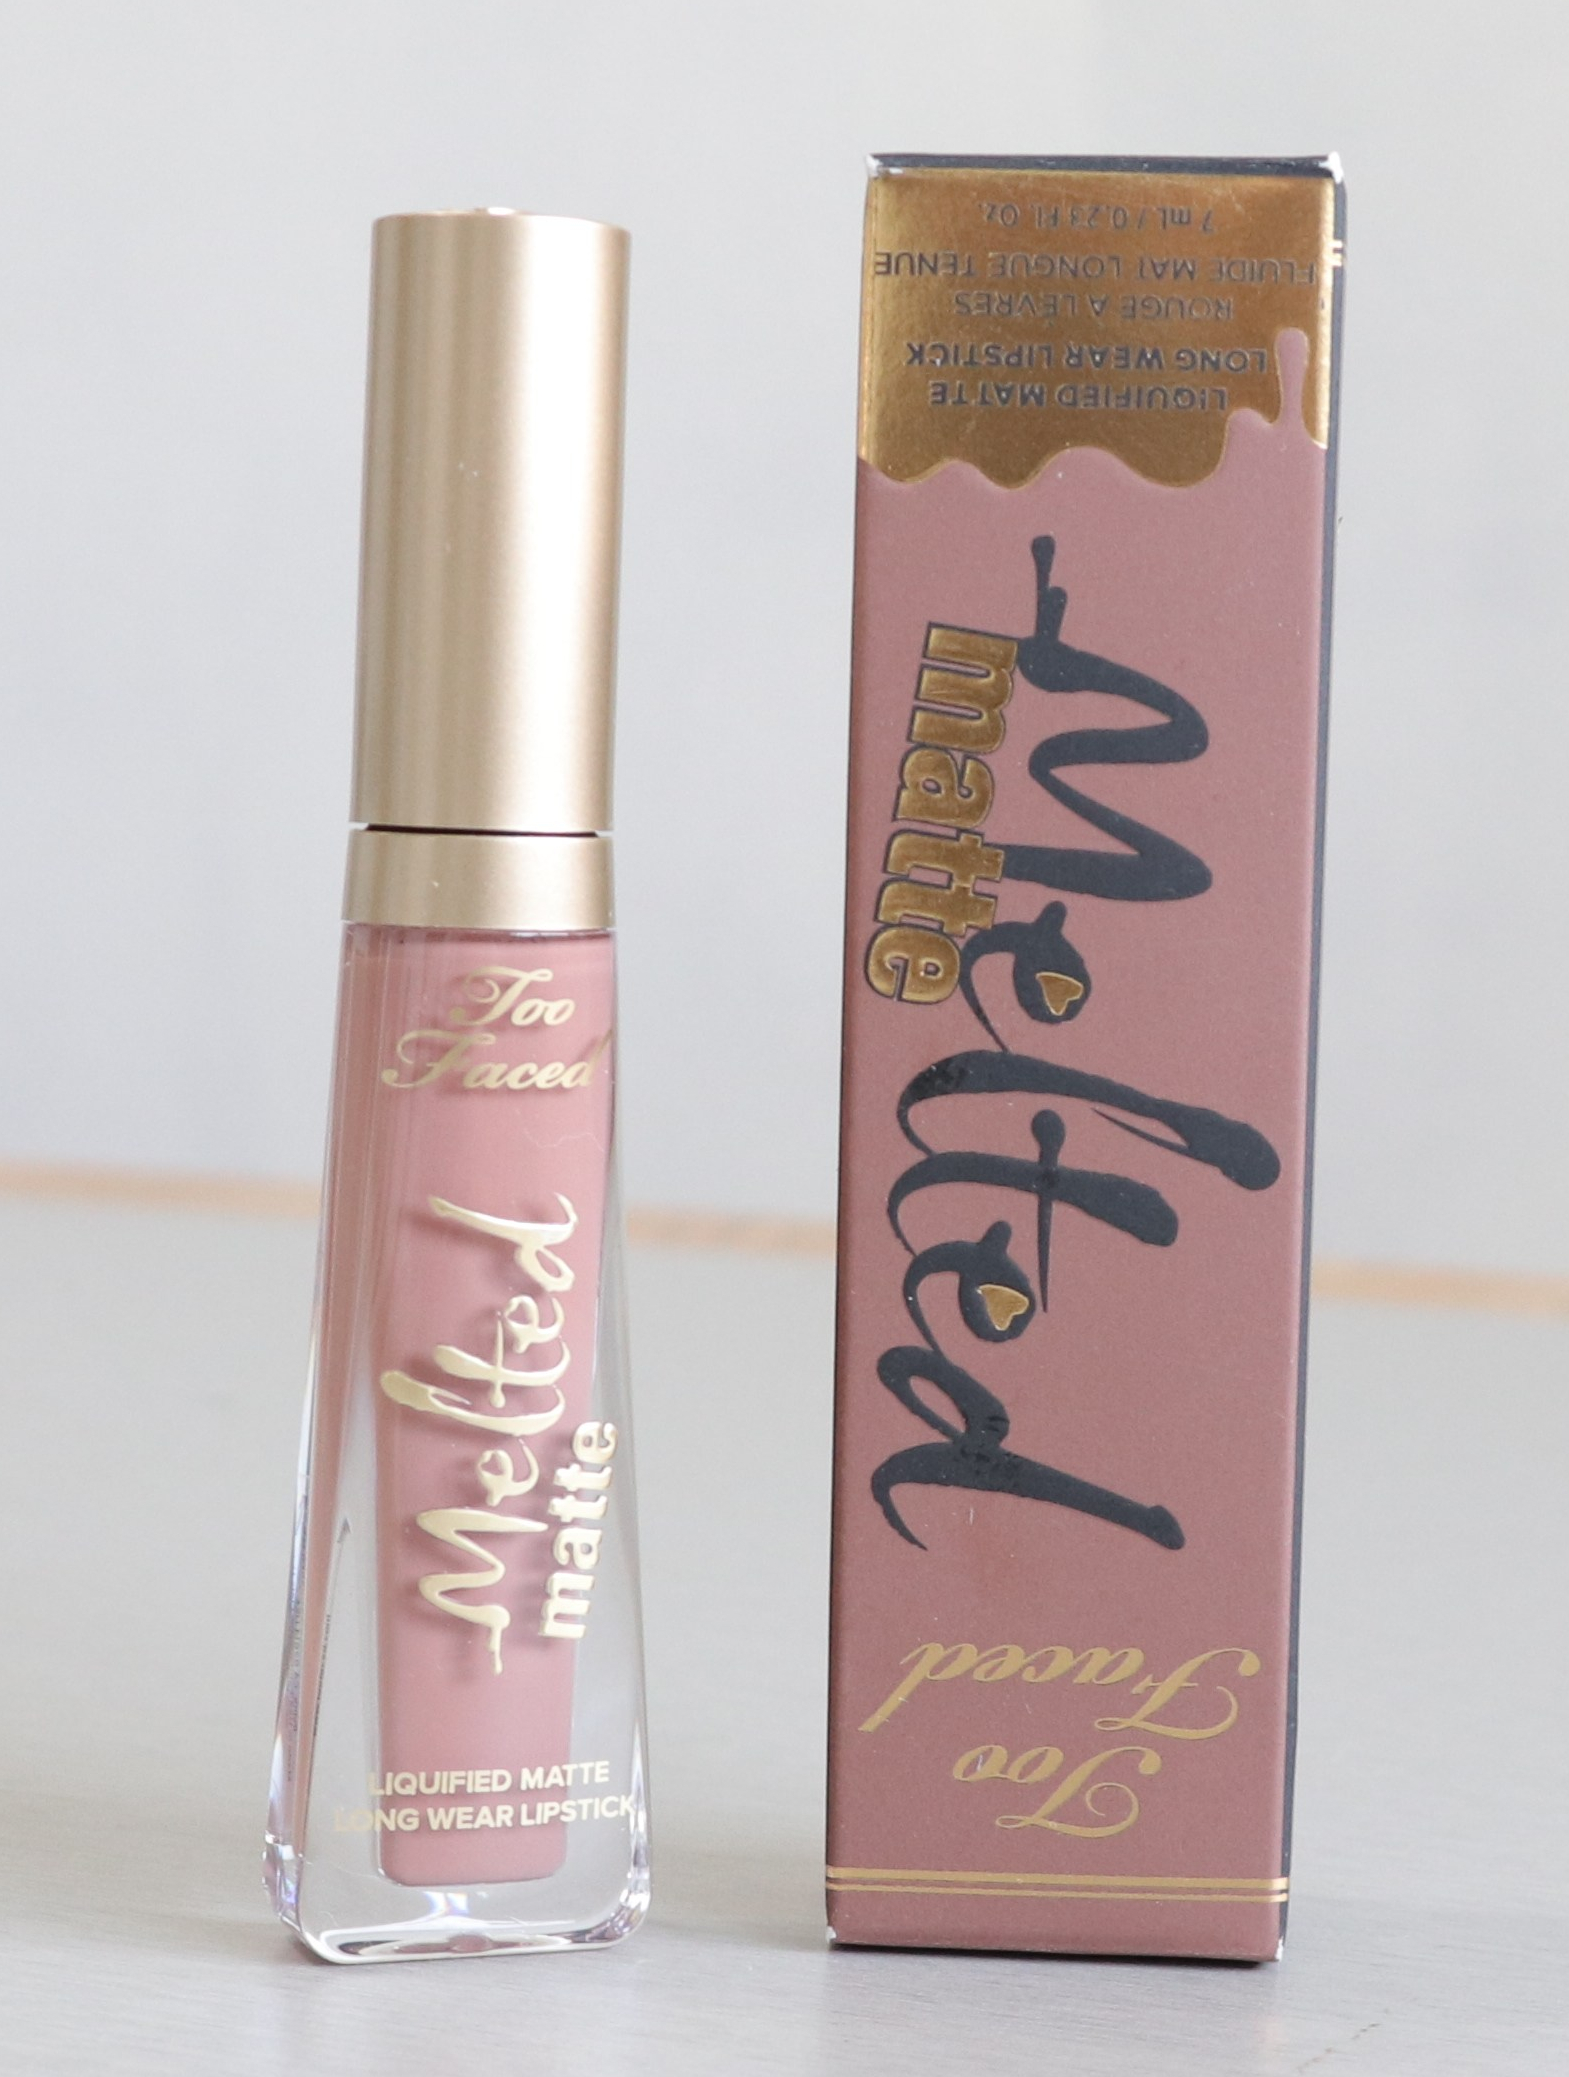 Too Faced Melted Matte Liquid Lipstick in Cool Girl